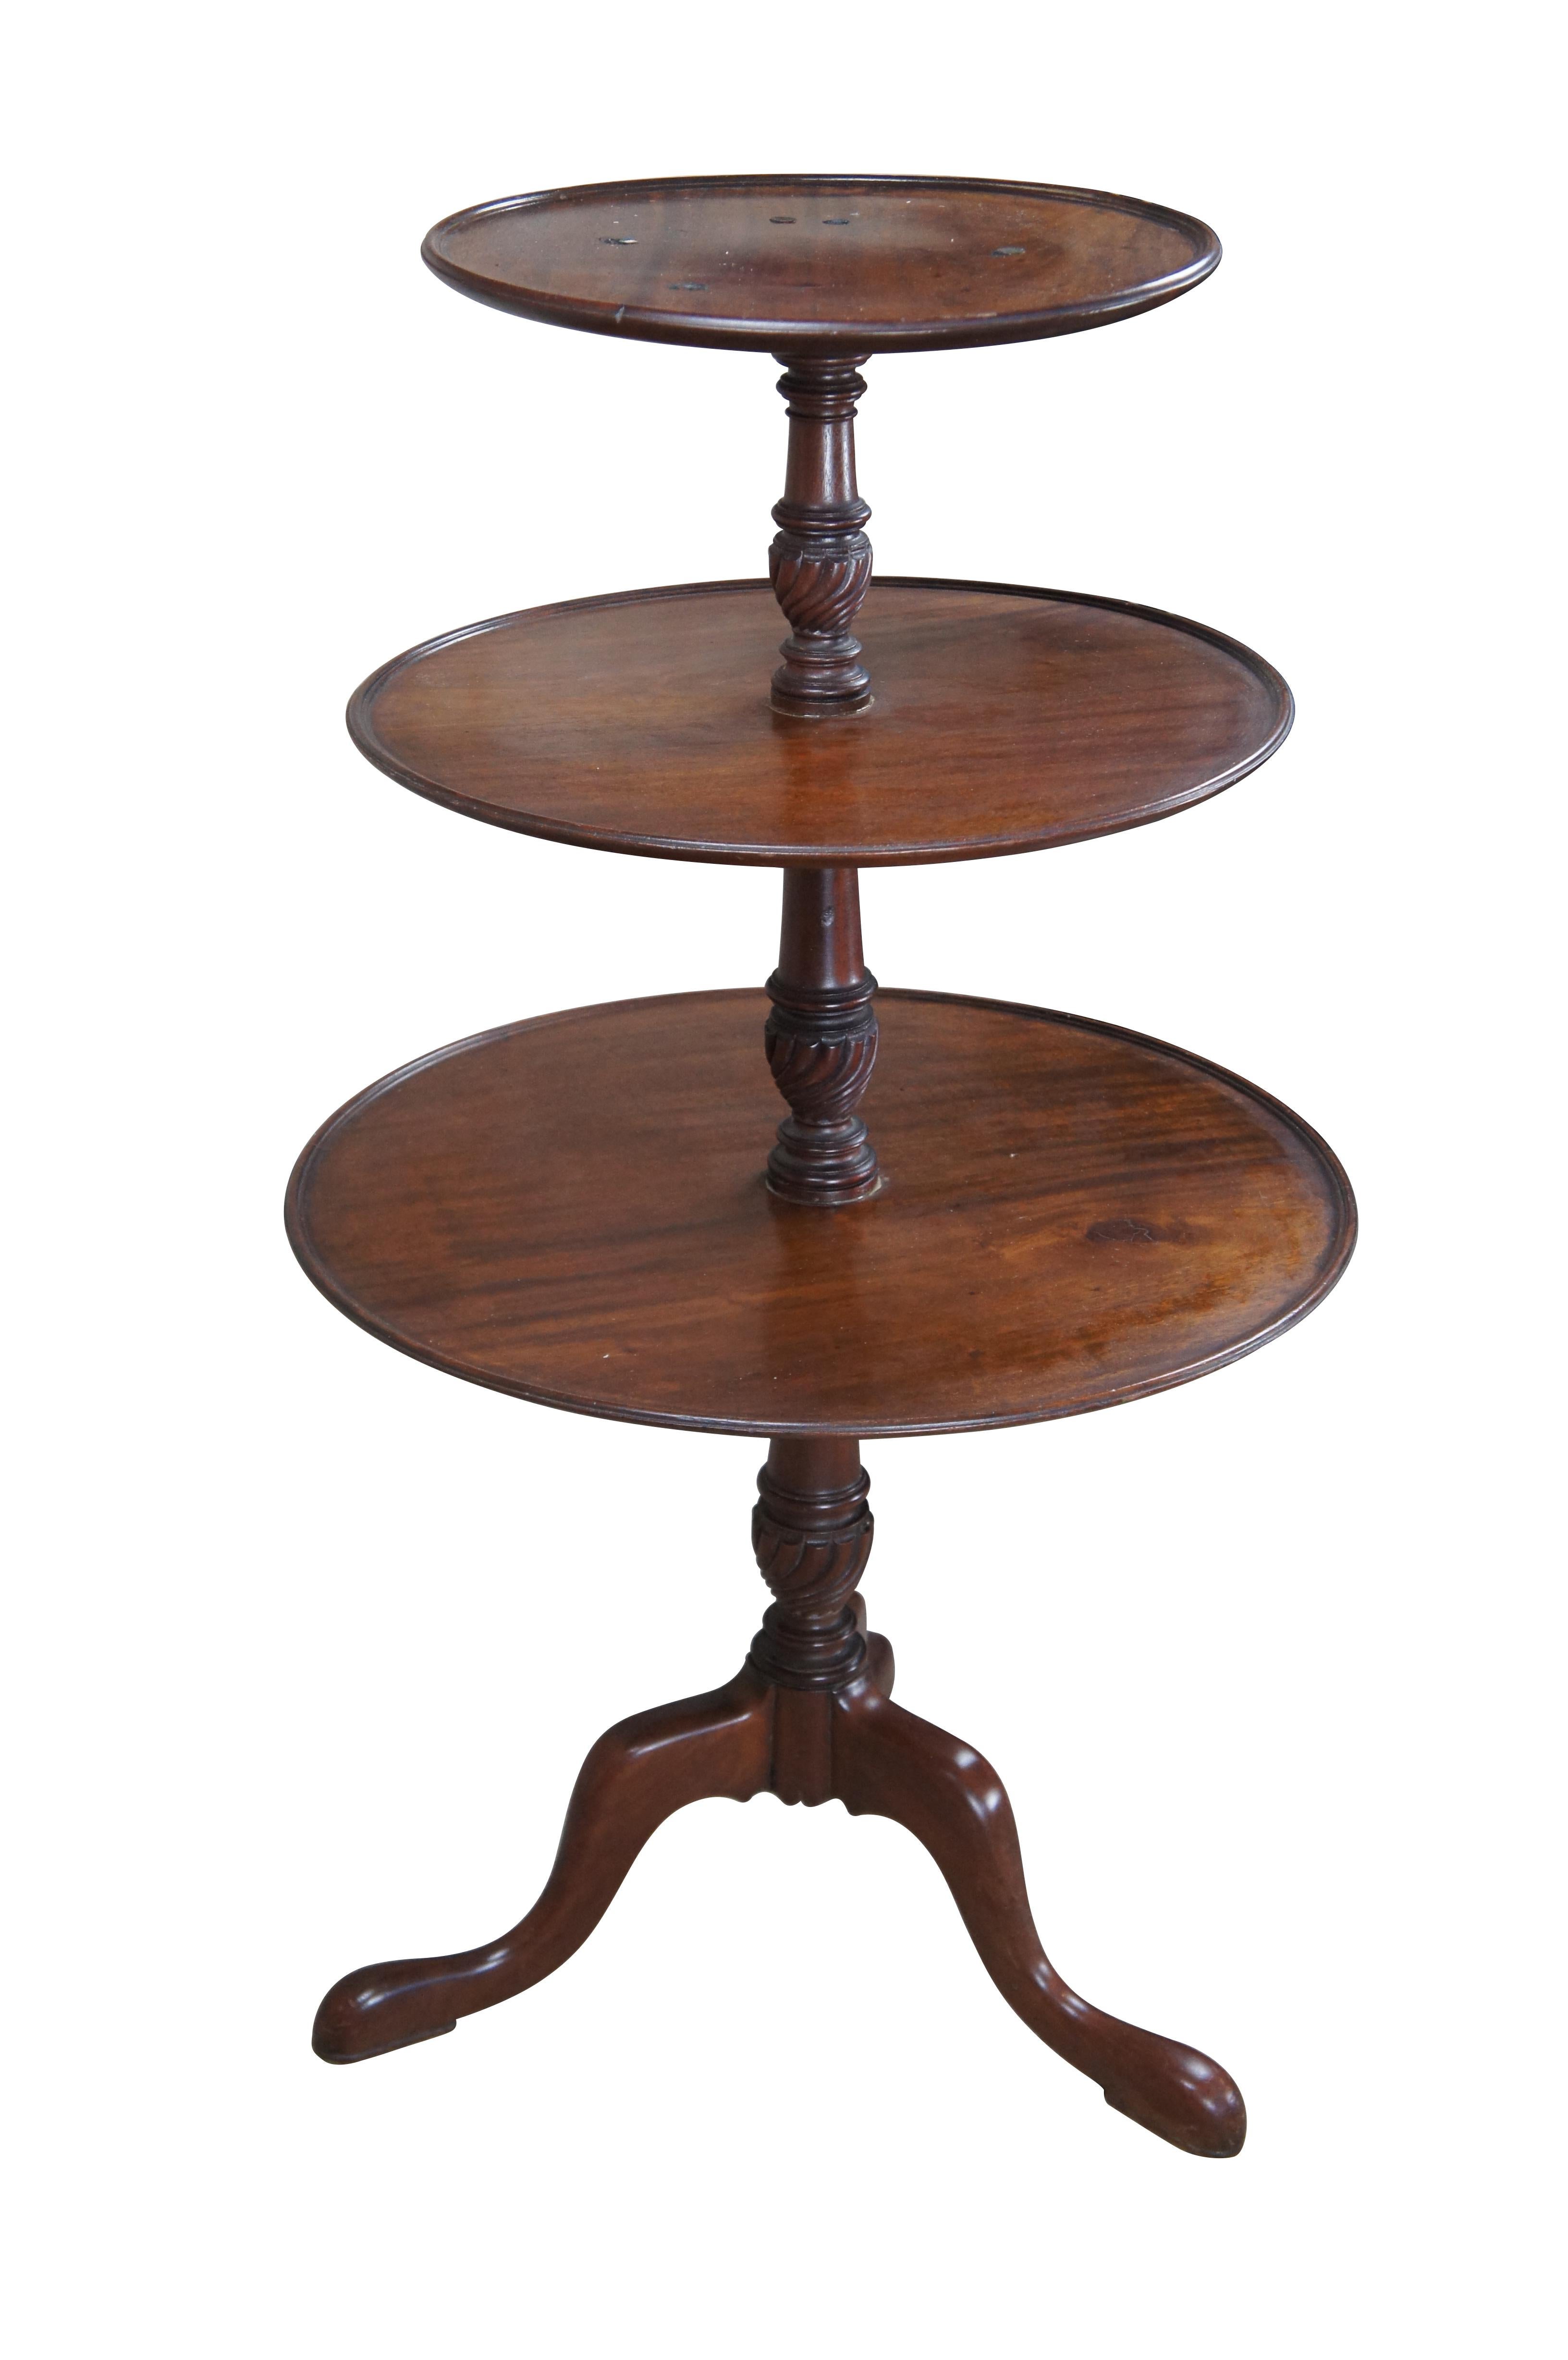 English Georgian Solid Mahogany 3 Tier Dumbwaiter Table Butler Pedestal Table In Good Condition For Sale In Dayton, OH